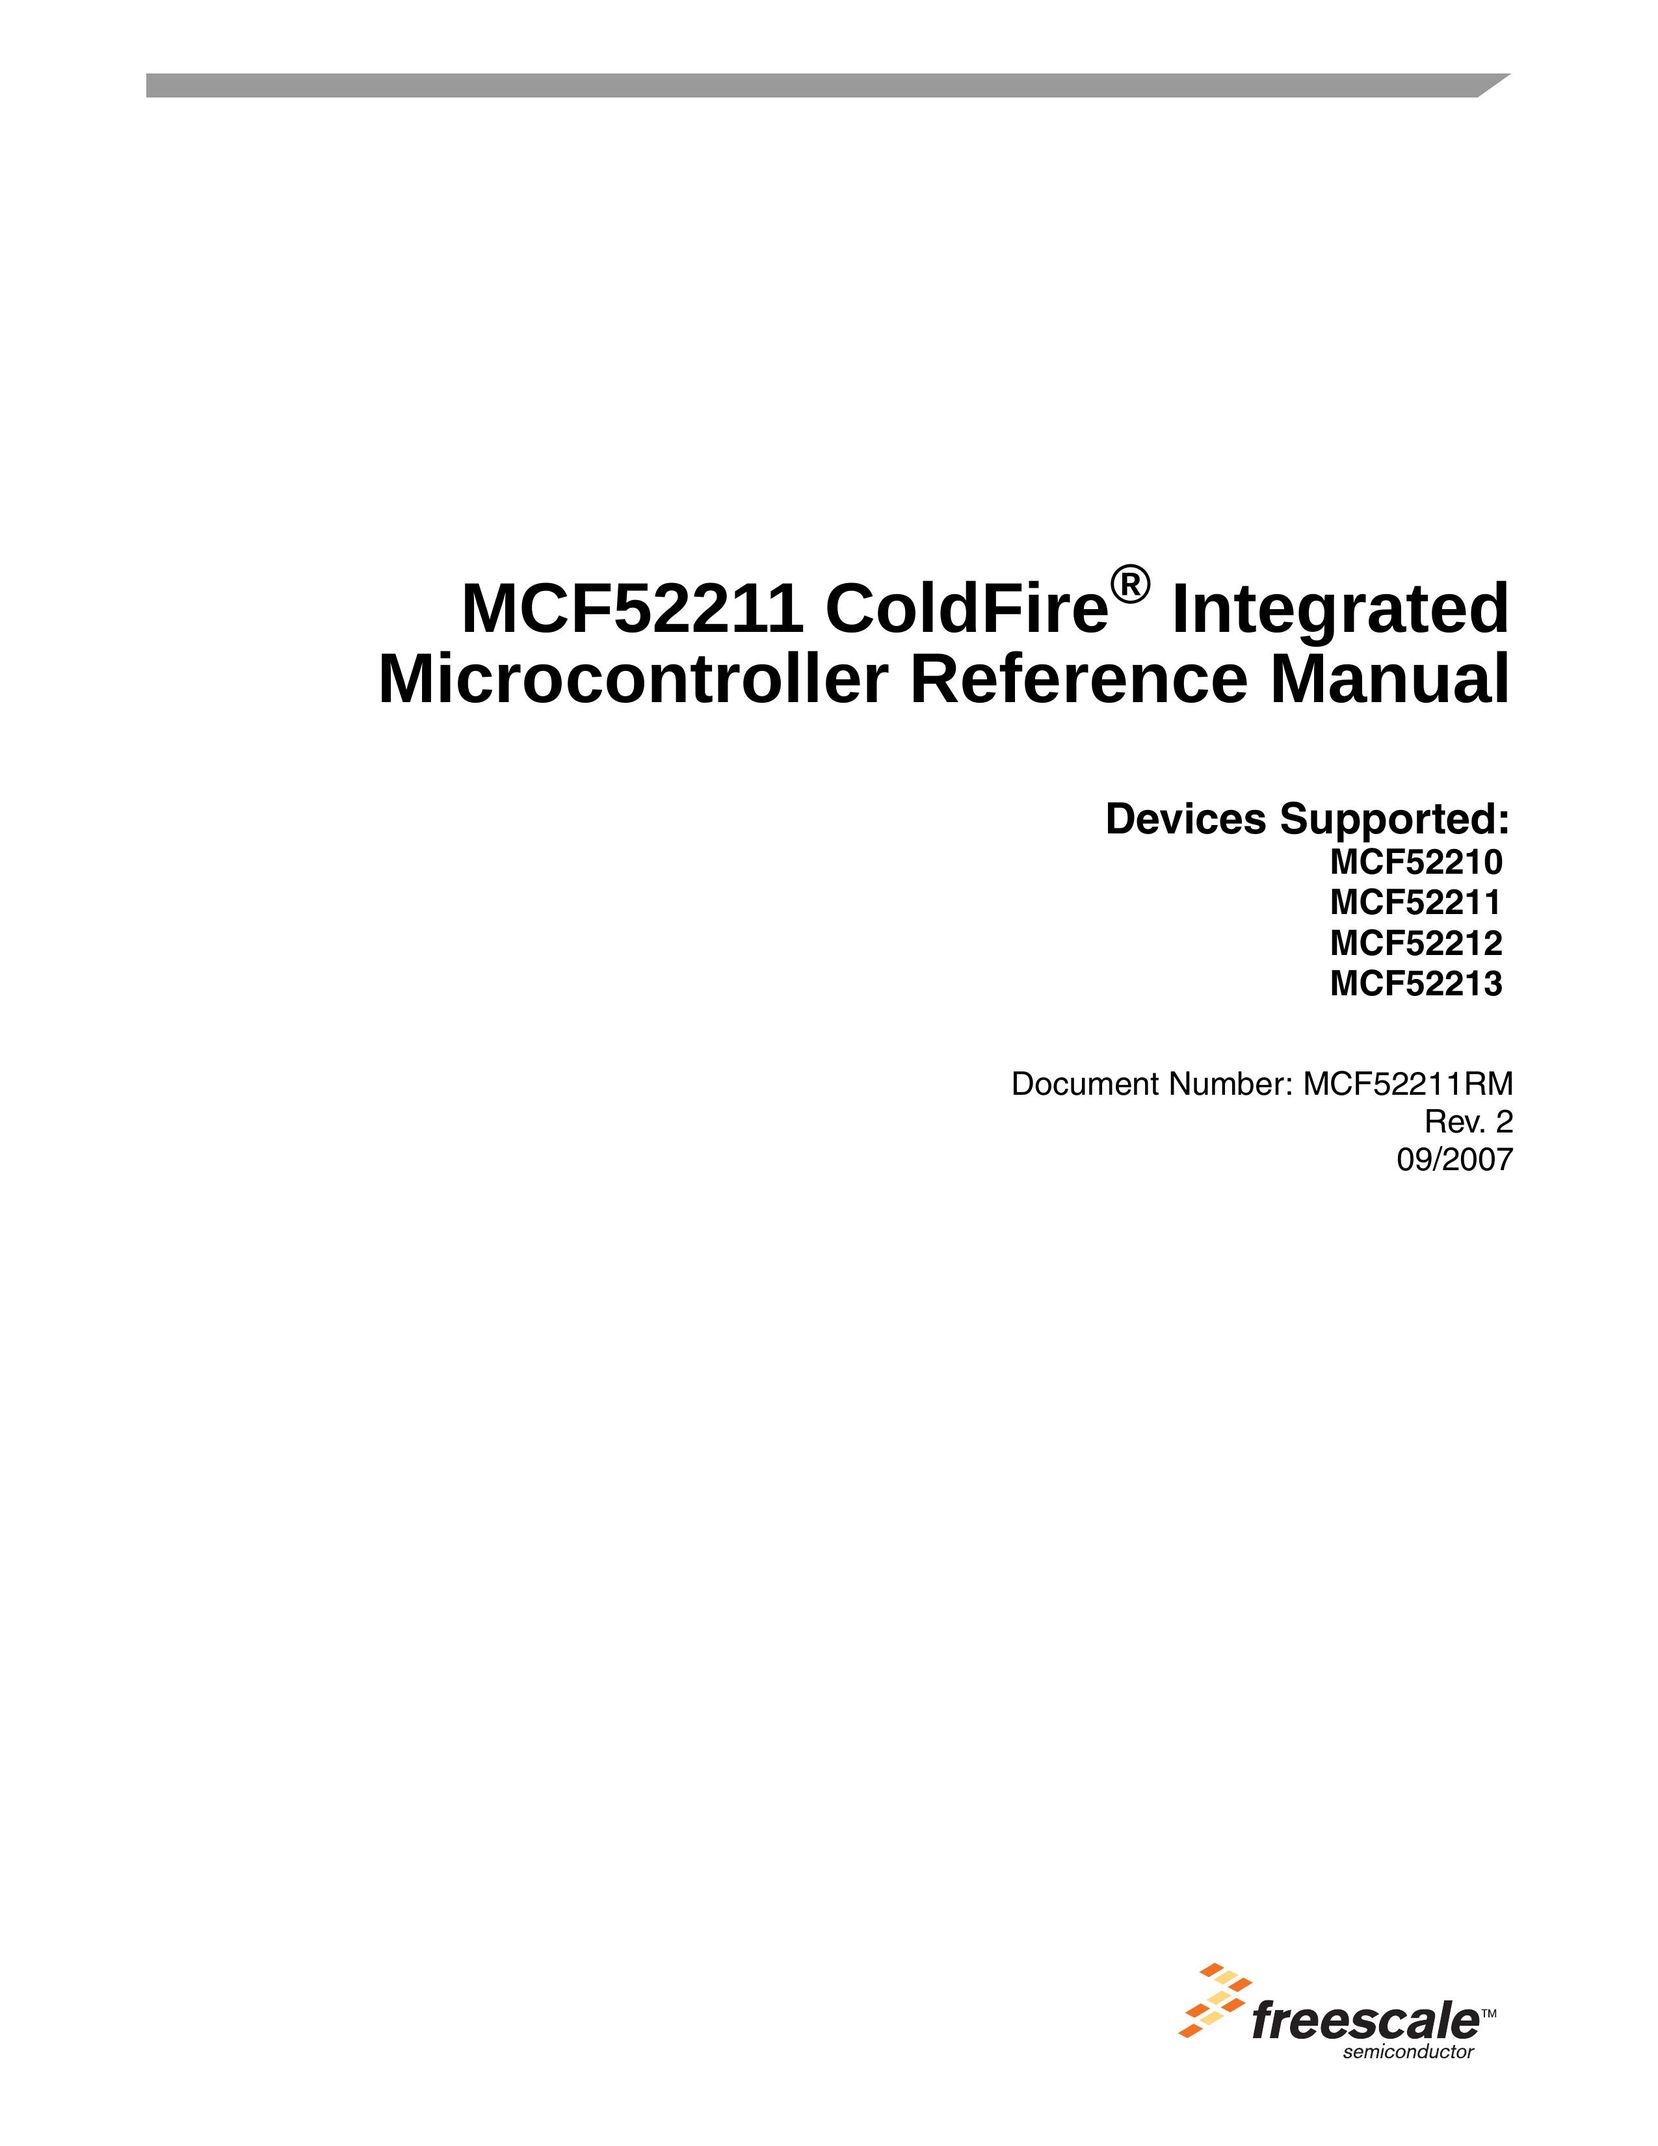 Freescale Semiconductor MCF52210 Network Card User Manual